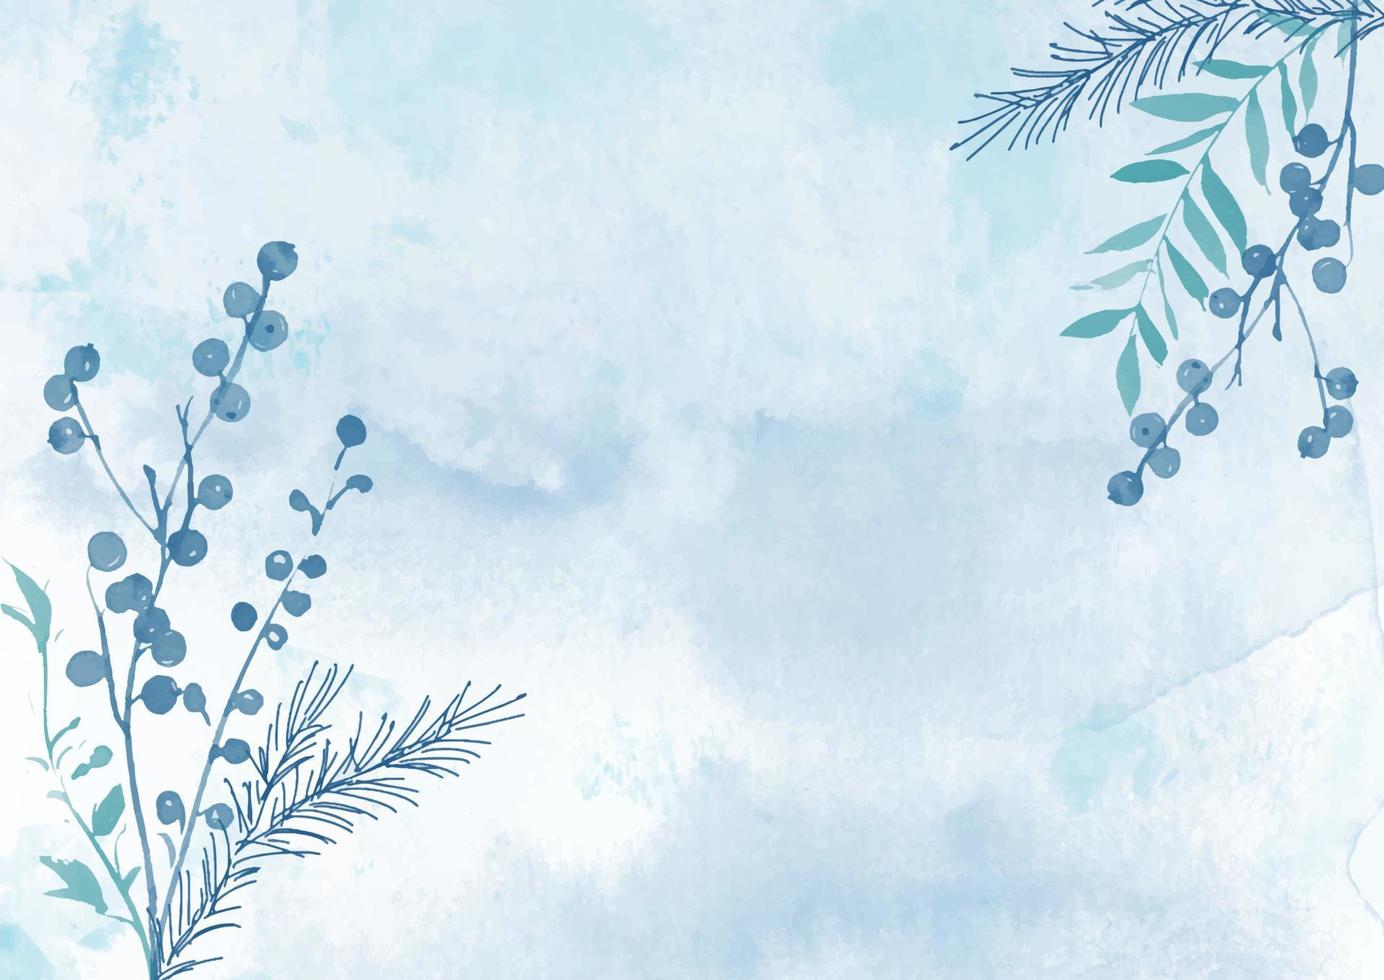 hand painted watercolour winter floral background vector